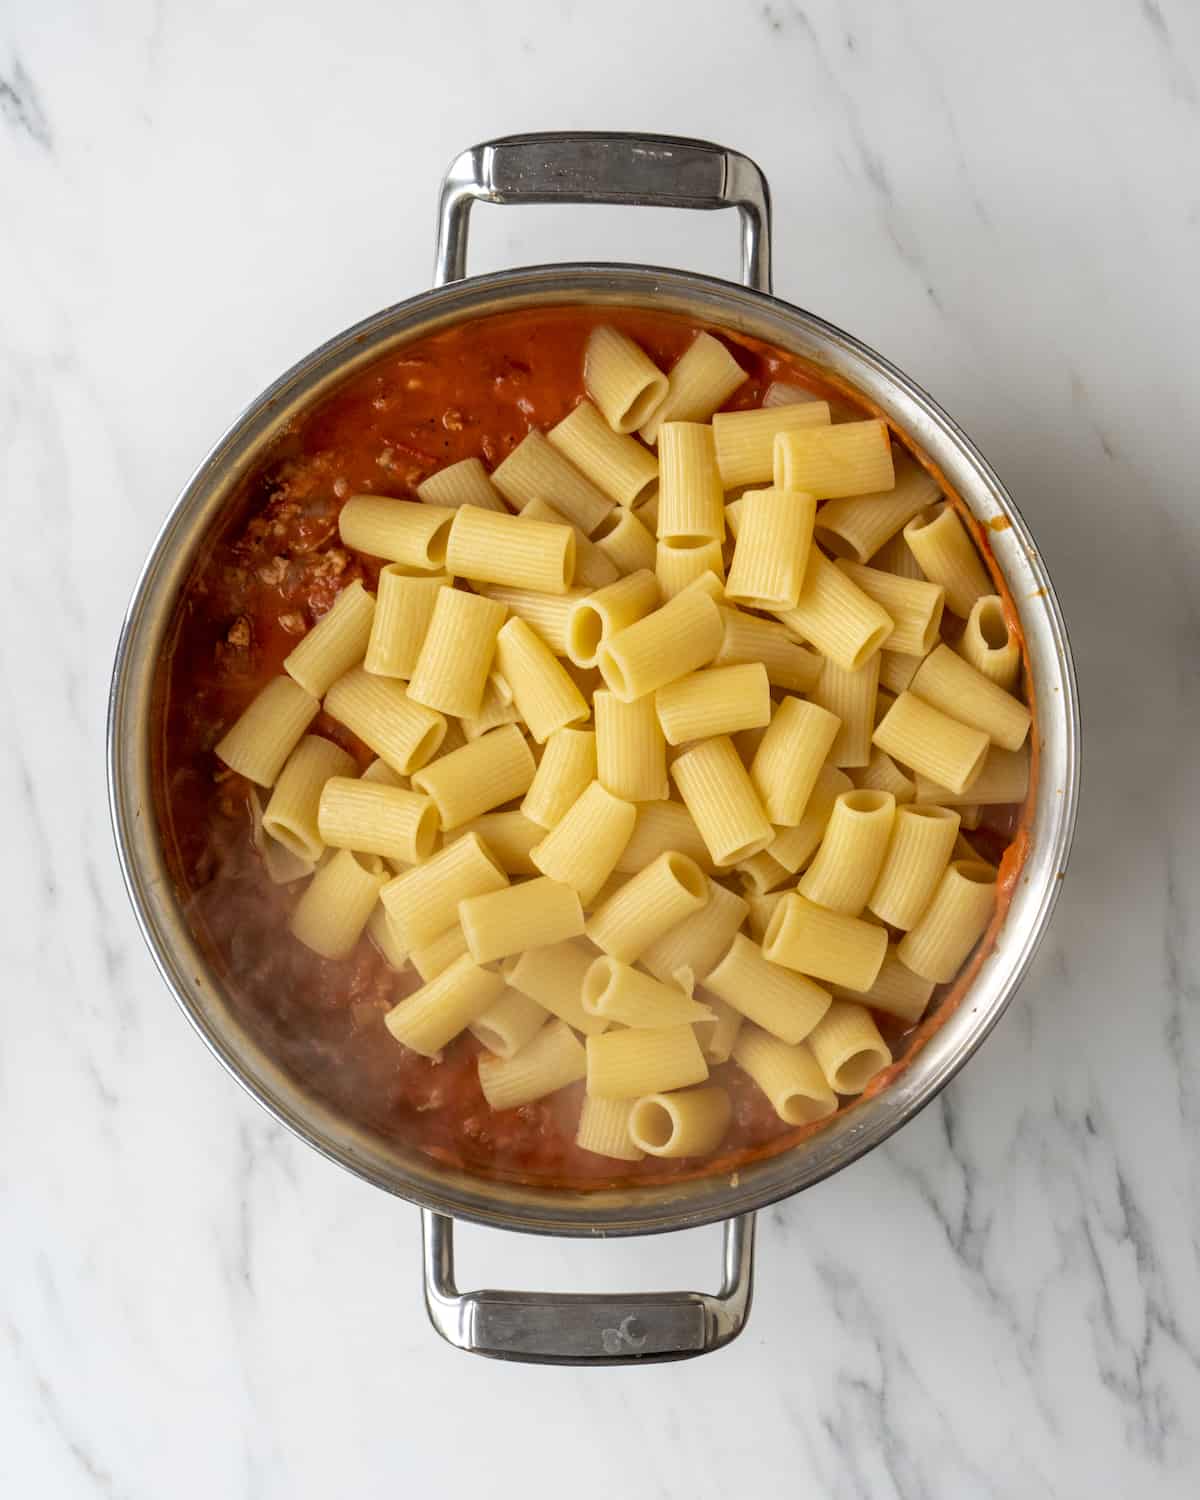 A skillet with red sauce with sausage being cooked and boiled rigatoni pasta just added to the skillet.